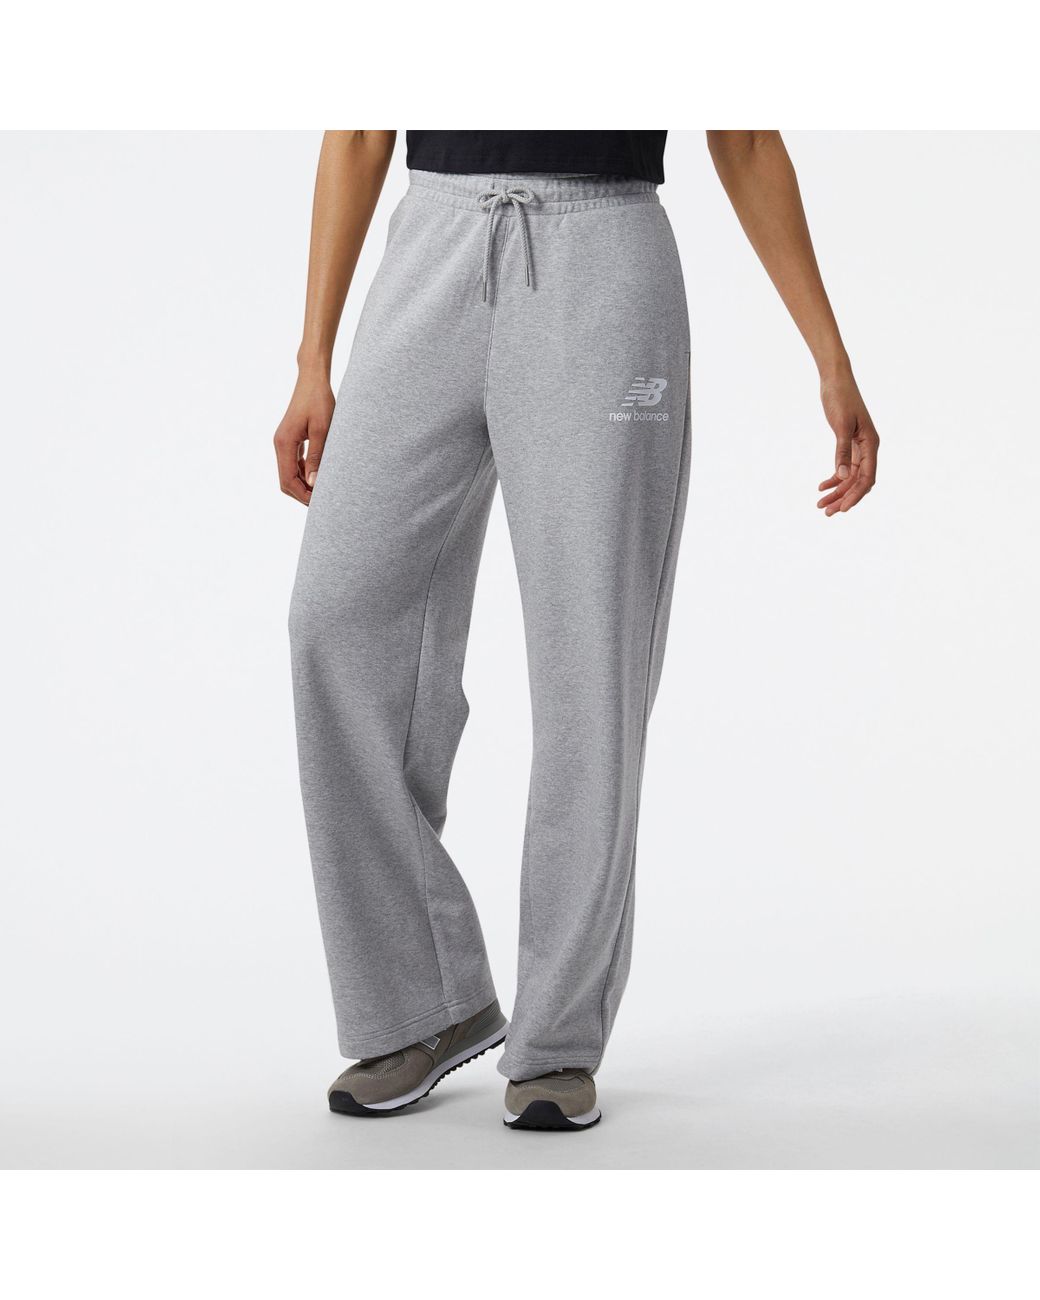 New Balance Gray Essentials French | Lyst Terry in Legged Stacked Logo Sweatpant Wide